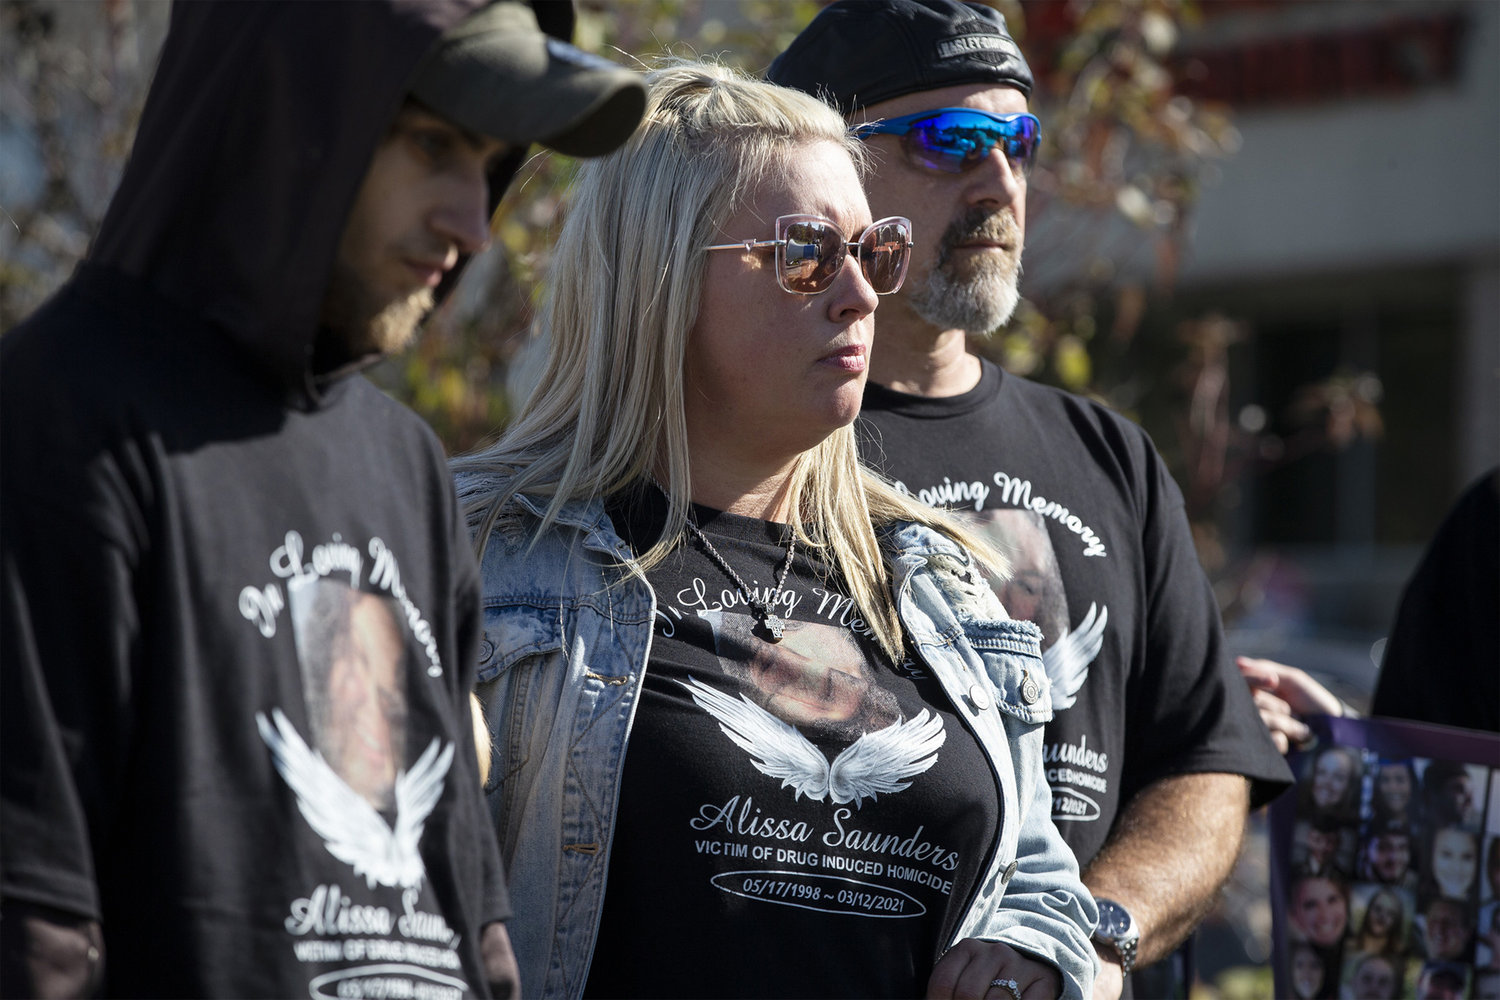 Janell Donegan, who lost her daughter Alissa Saunders to a drug overdose in March, rallies with other moms pushing for aggressive drug-induced homicide prosecutions on Oct. 23, 2021, in New Lenox, Illinois. (John Konstantaras/Chicago Tribune/TNS)